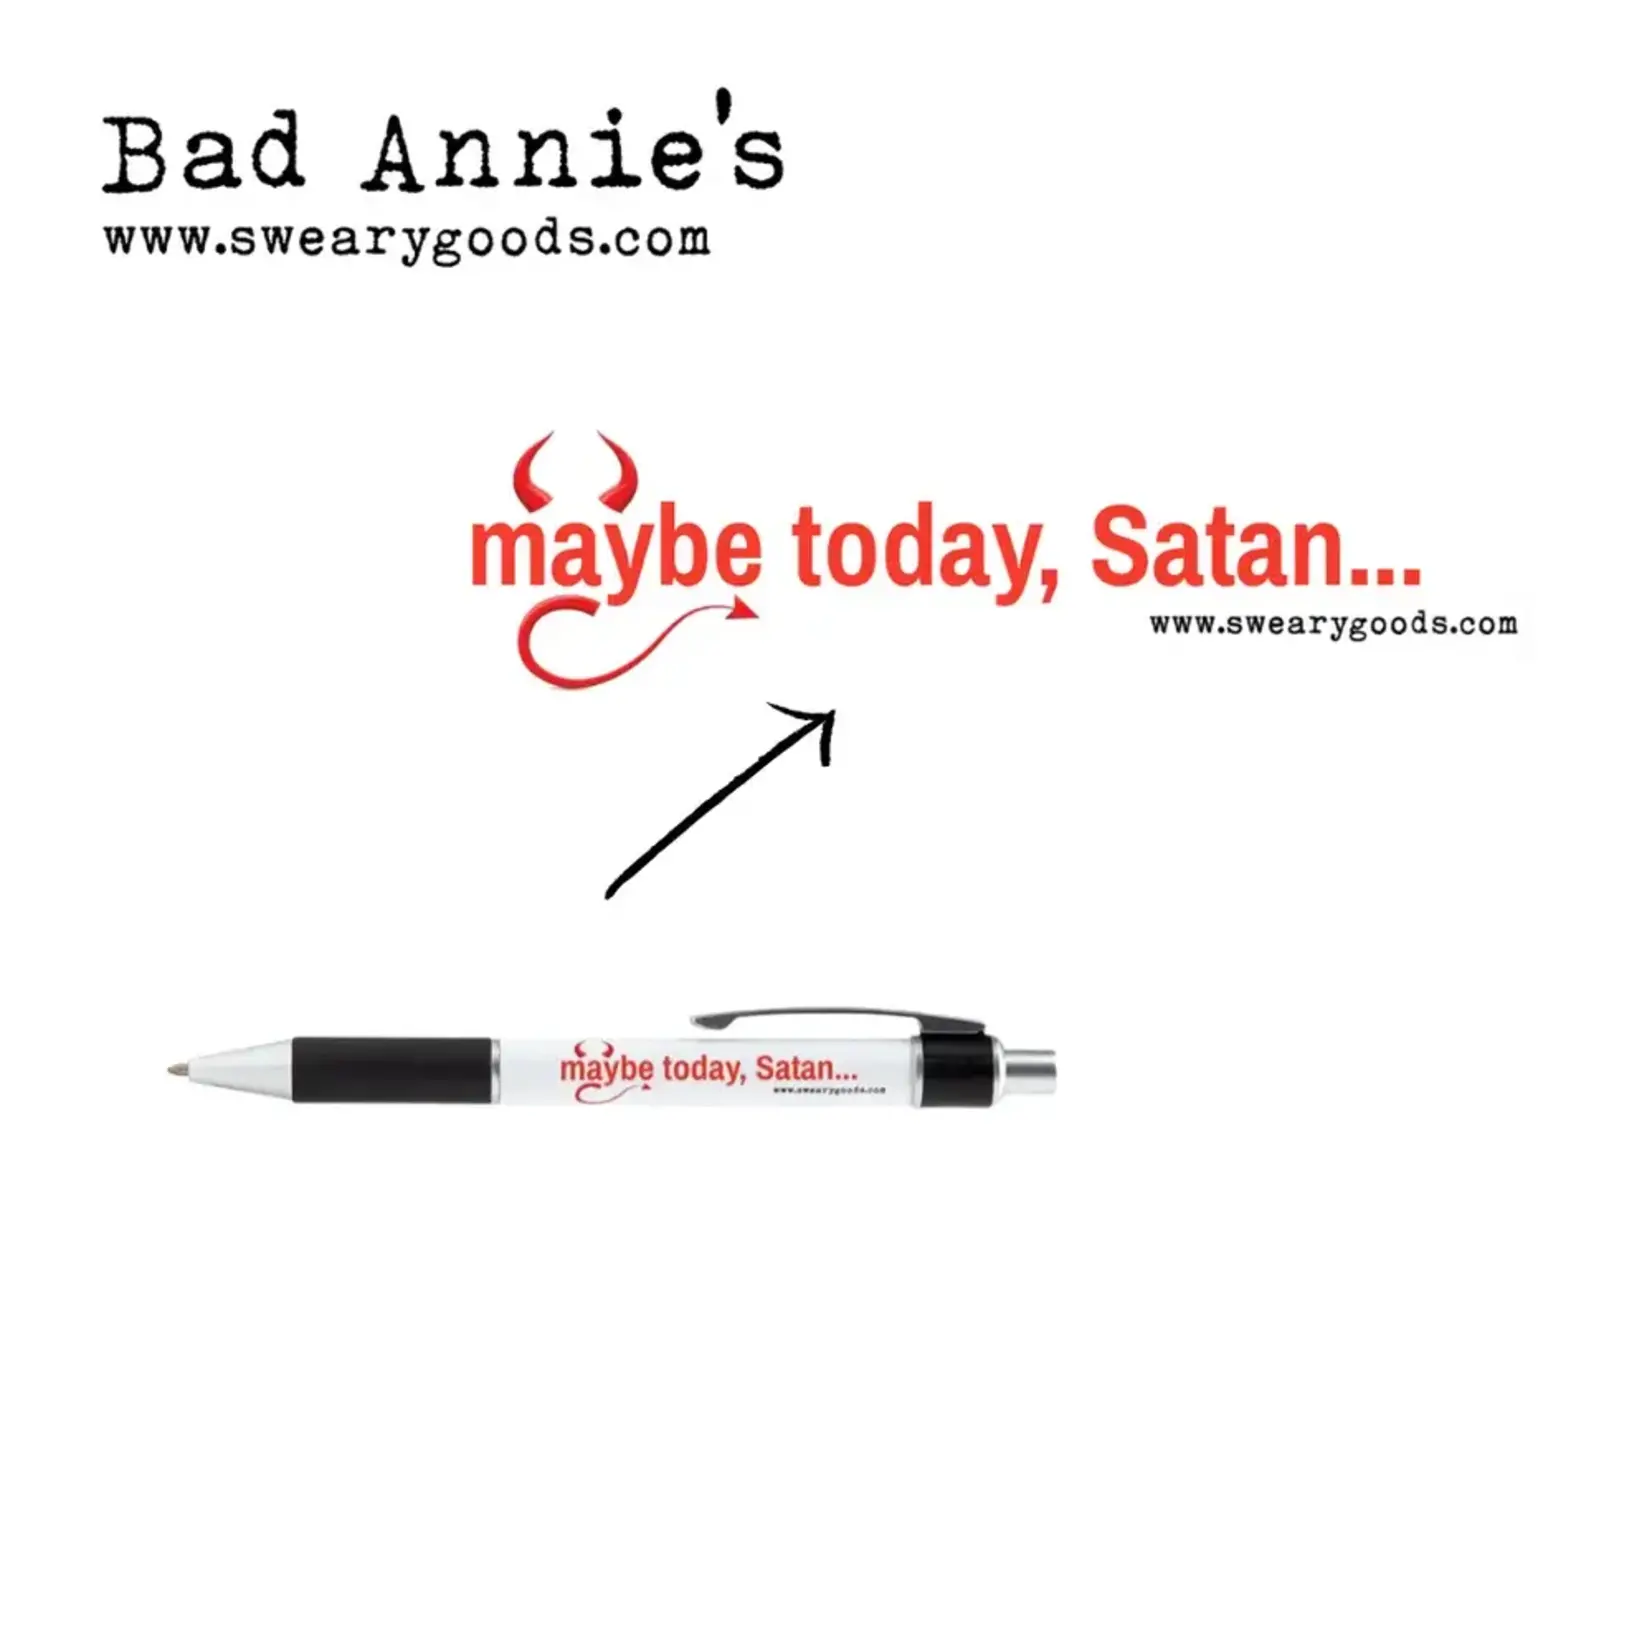 Bad Annie’s Pen - Maybe today satan